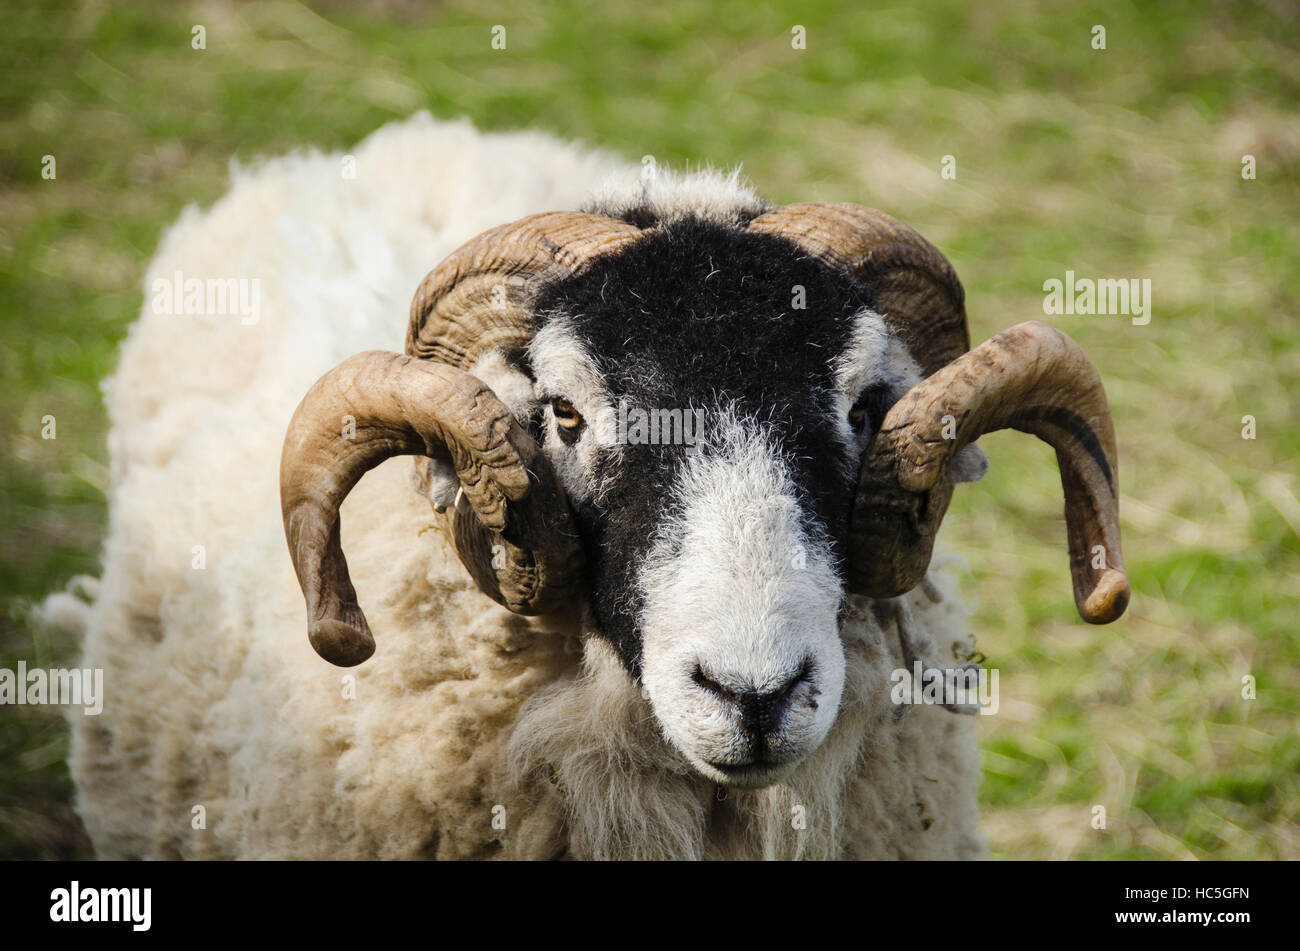 With thick woolly coat & curled horns, adult Swaledale sheep in farm field, is staring at camera (head & face close-up) - North Yorkshire England, UK. Stock Photo